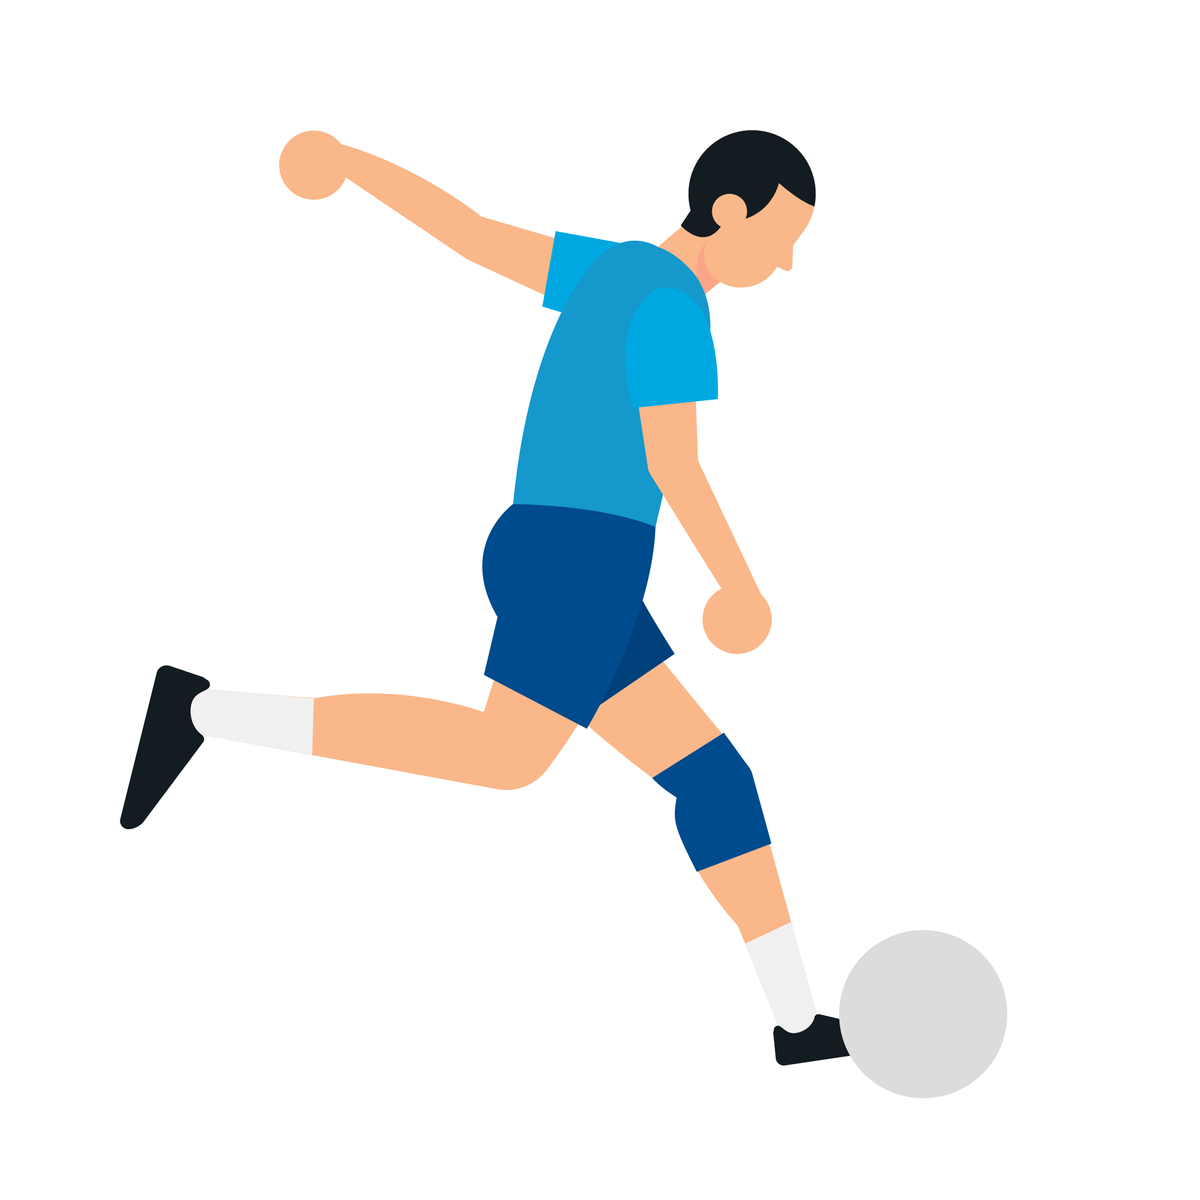 A graphic of a soccer player kicking a soccer ball